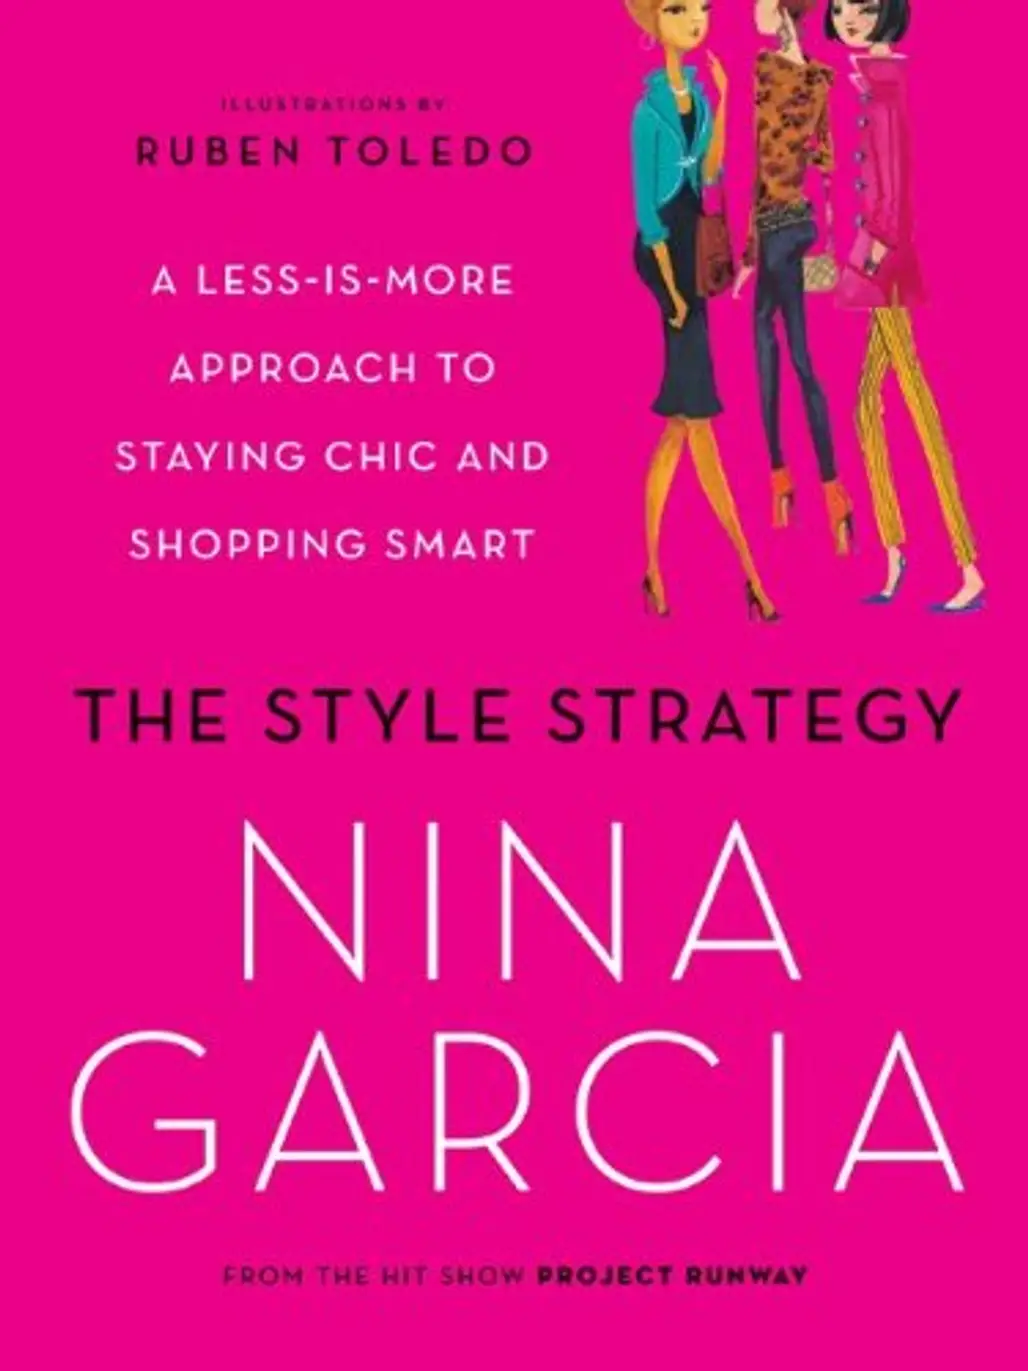 The Style Strategy: a Less-is-More Approach to Staying Chic and Shopping Smart by Nina Garcia